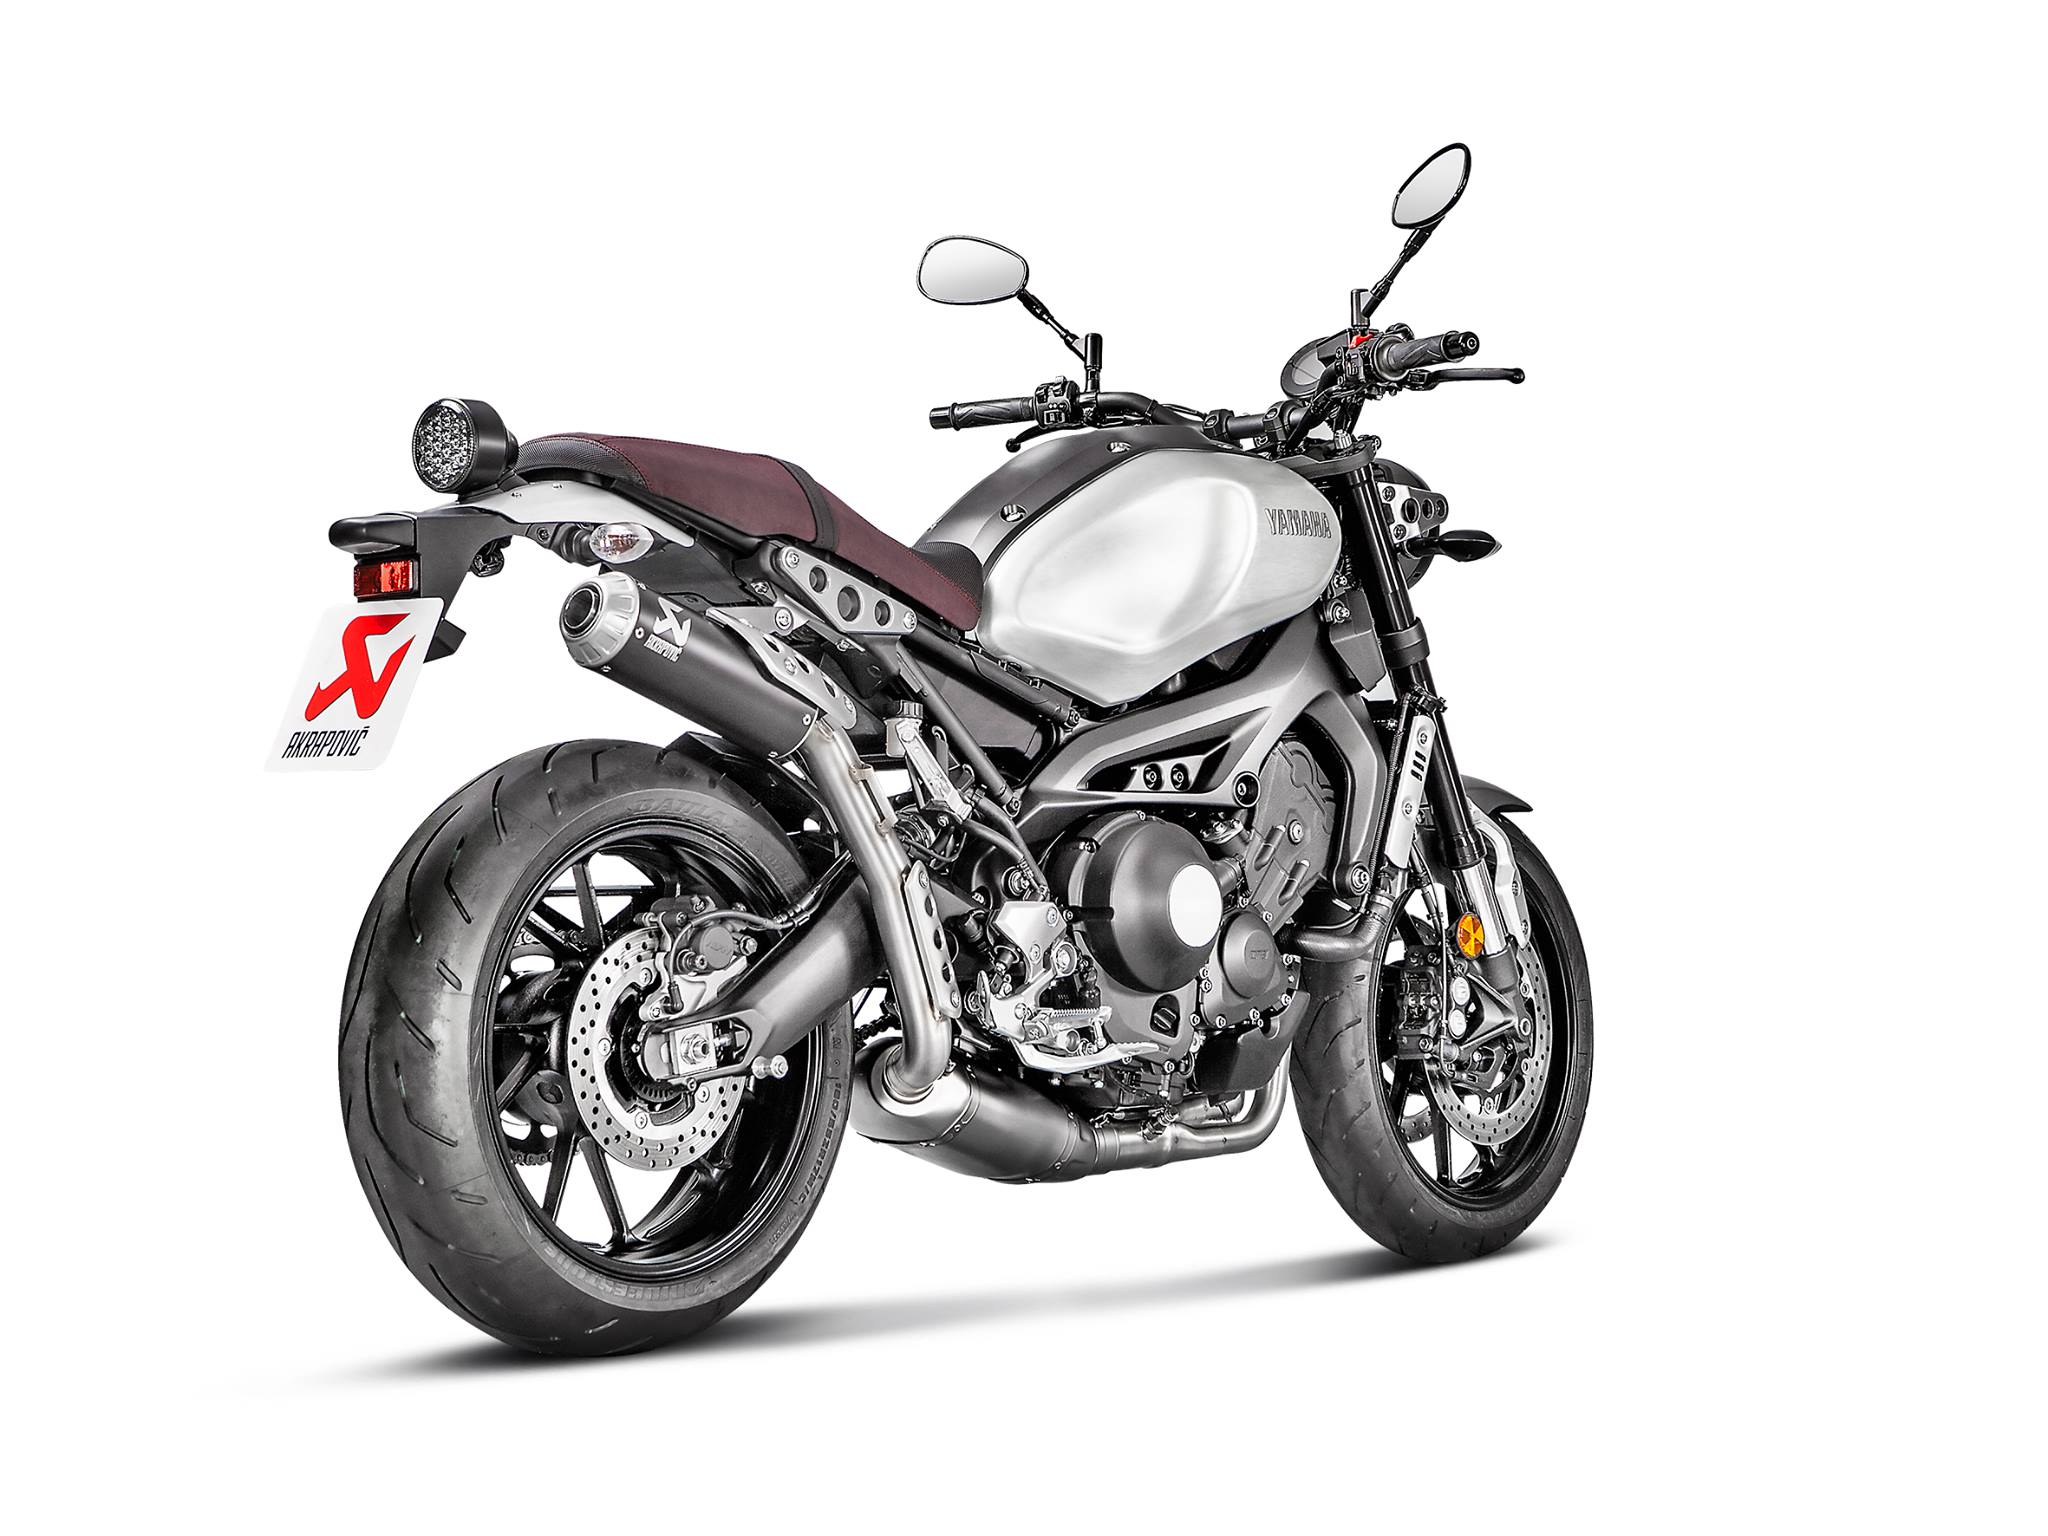 Yamaha Xsr900 Souped Up With New Akrapovic Exhausts_4